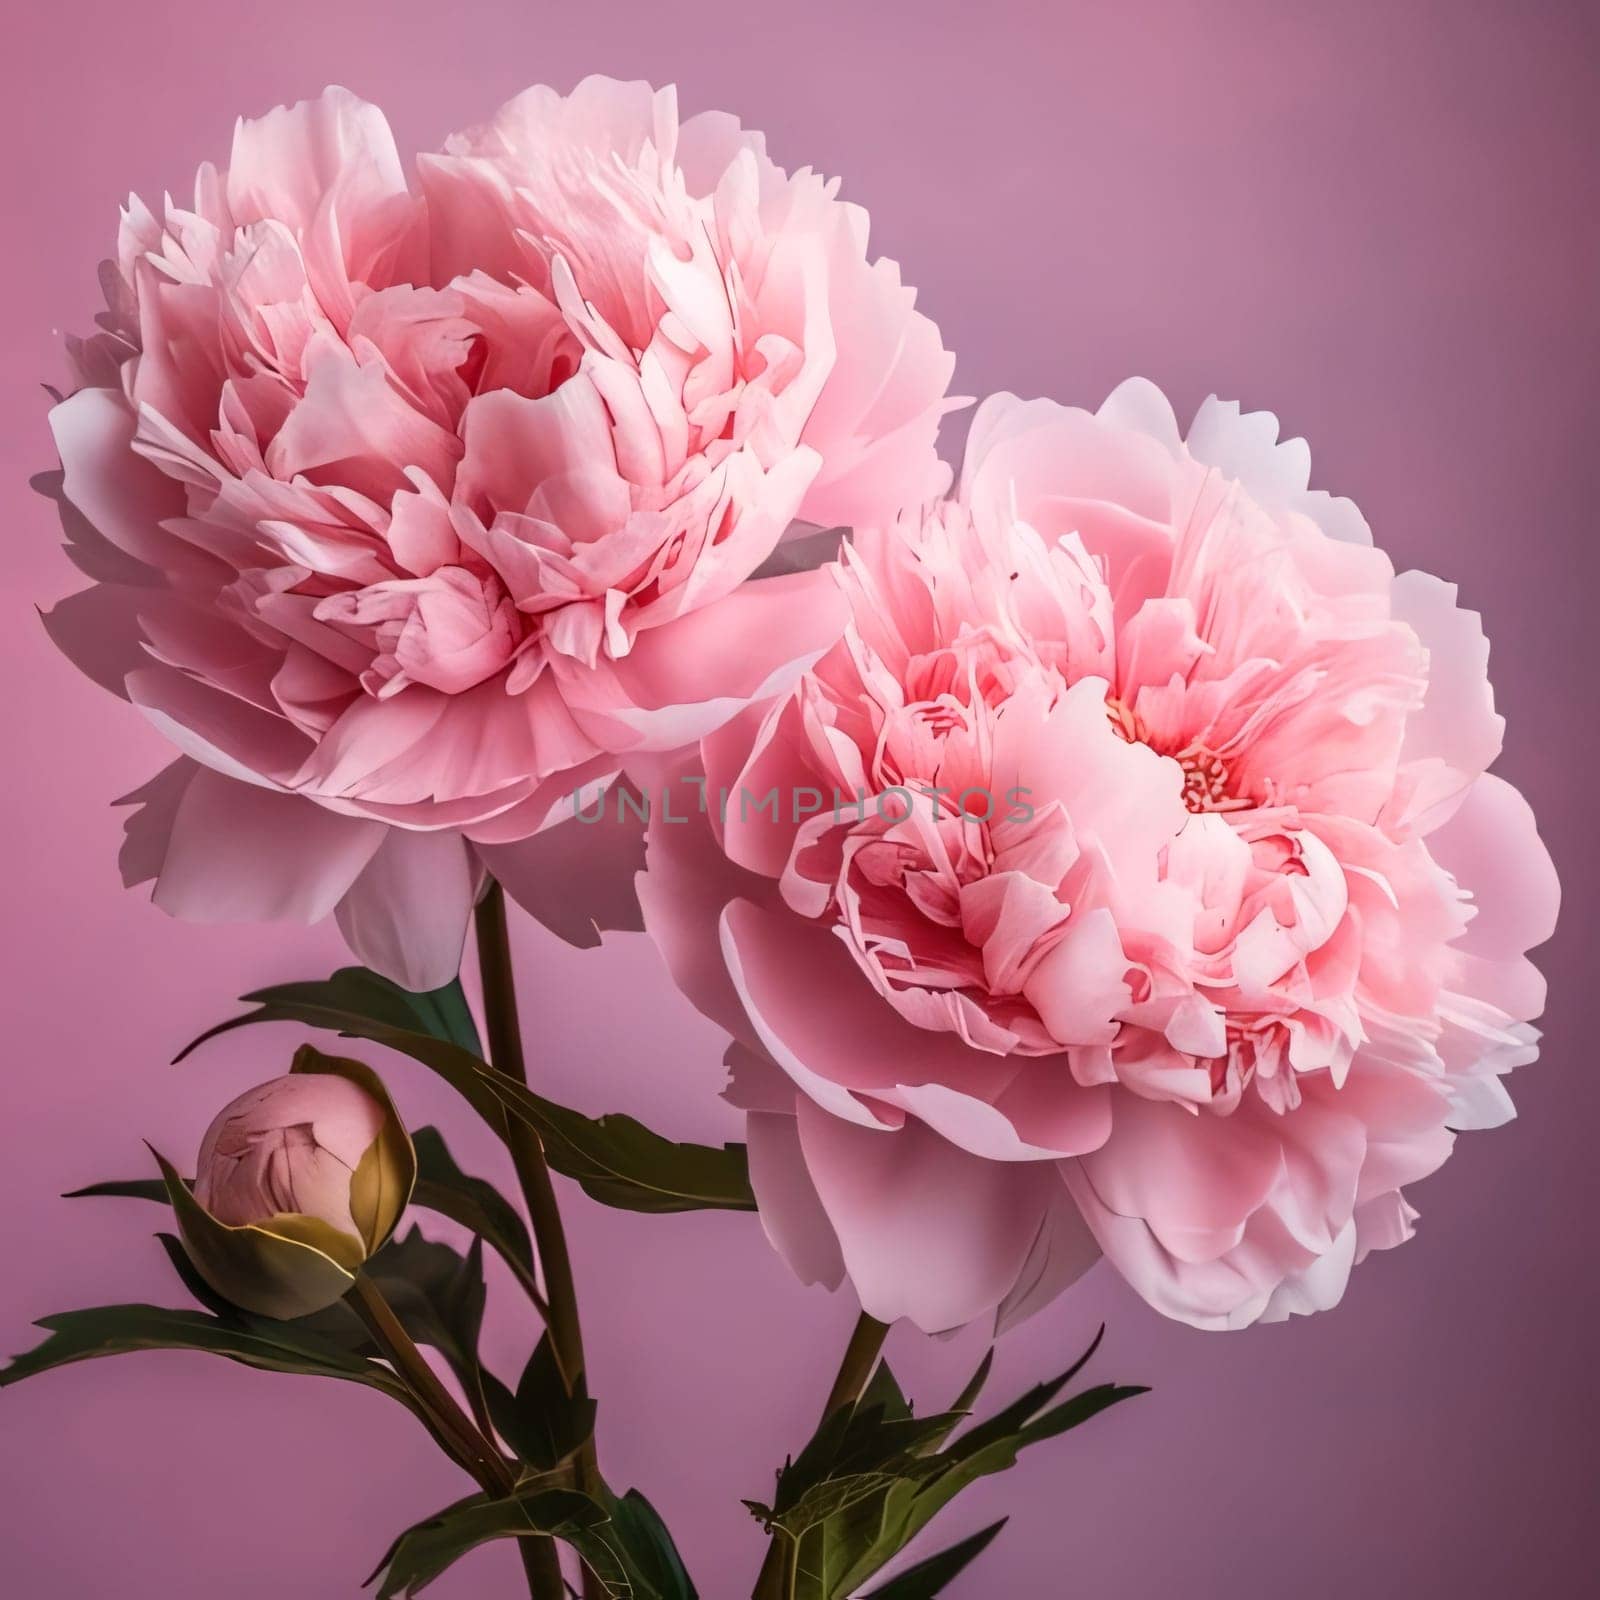 Two pink peony flowers and one bud. Dark background. Flowering flowers, a symbol of spring, new life. by ThemesS